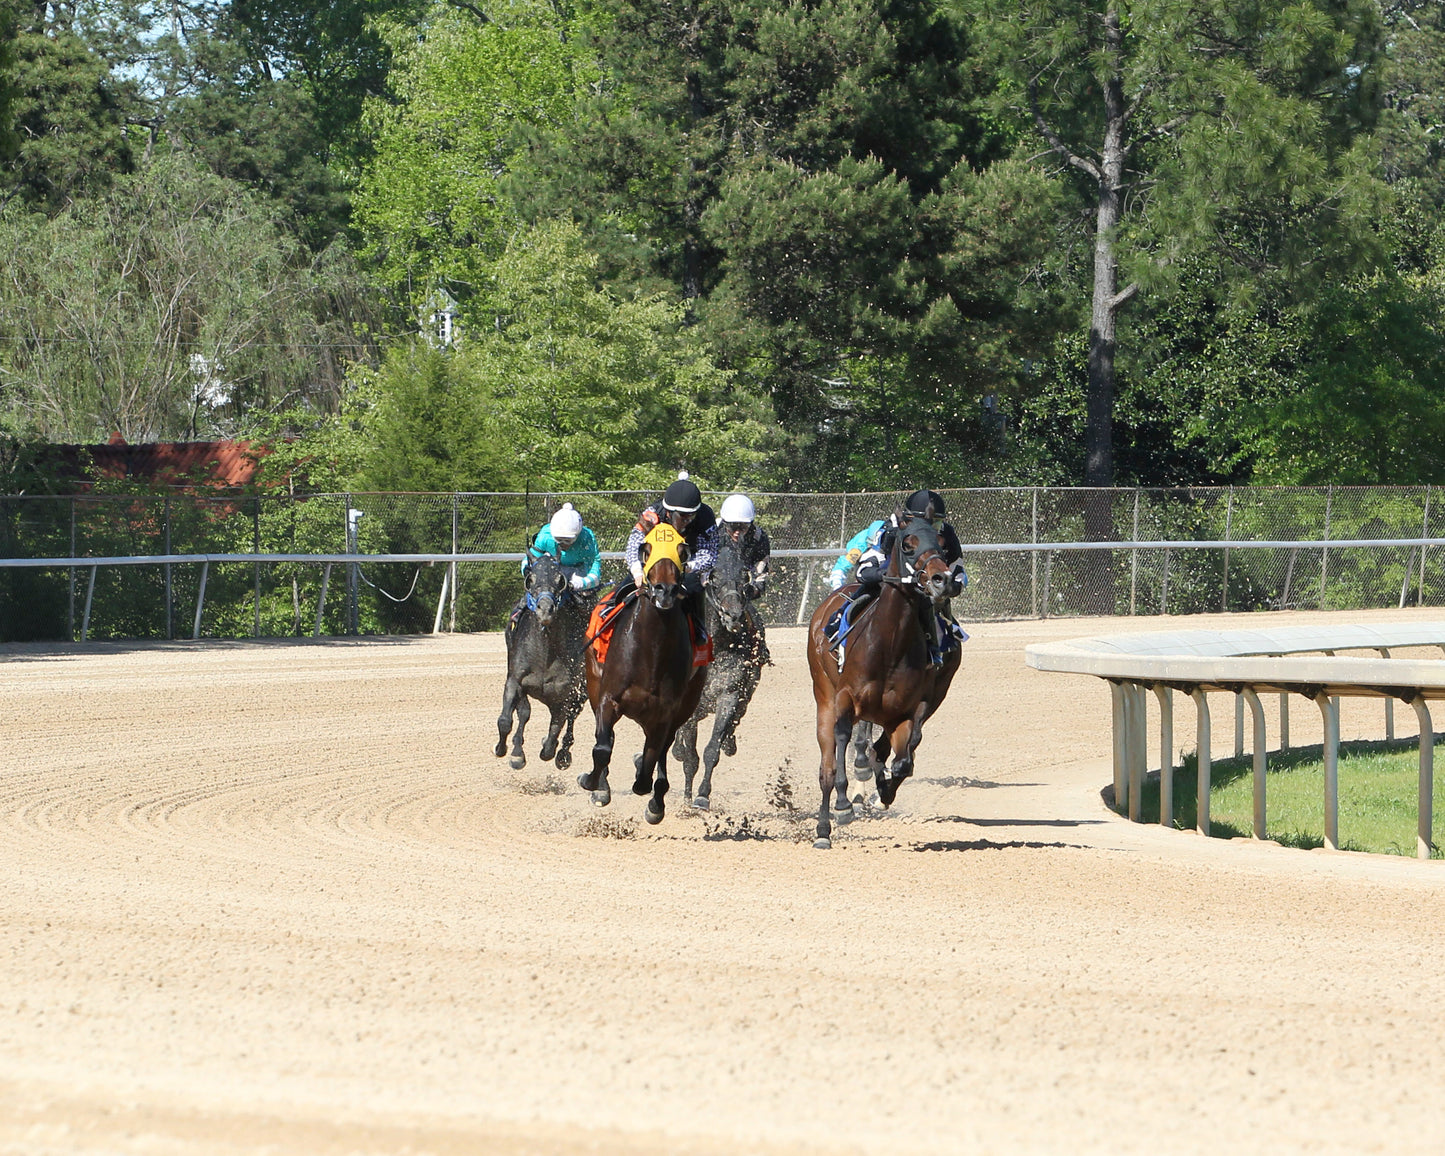 TAPIT STAR  - The Rainbow - 46th Running - 04-20-19 - R07 - OP - Turn 01